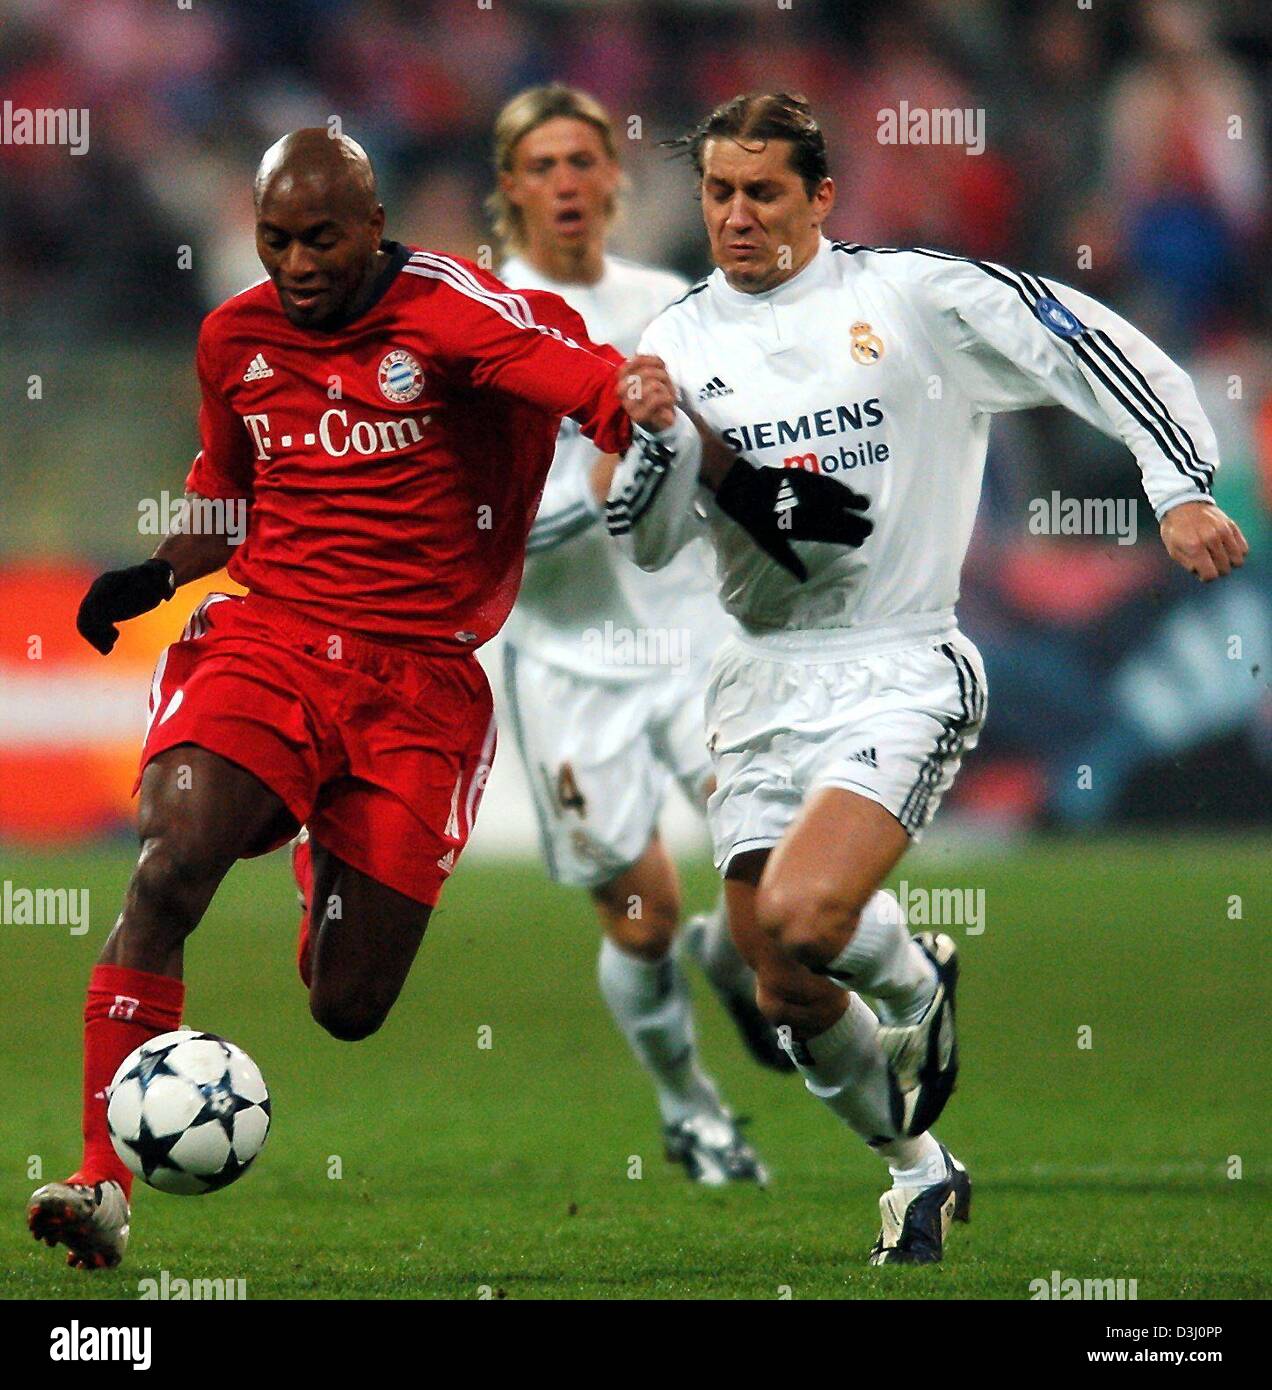 (dpa) Ze Roberto (left) of Bayern Munich runs with the ball as he is followed by Real Madrid player Michel Salgado during the Champions League match between FC Bayern Munich and Real Madrid in Munich on Tuesday, 24 February , 2004. Stock Photo